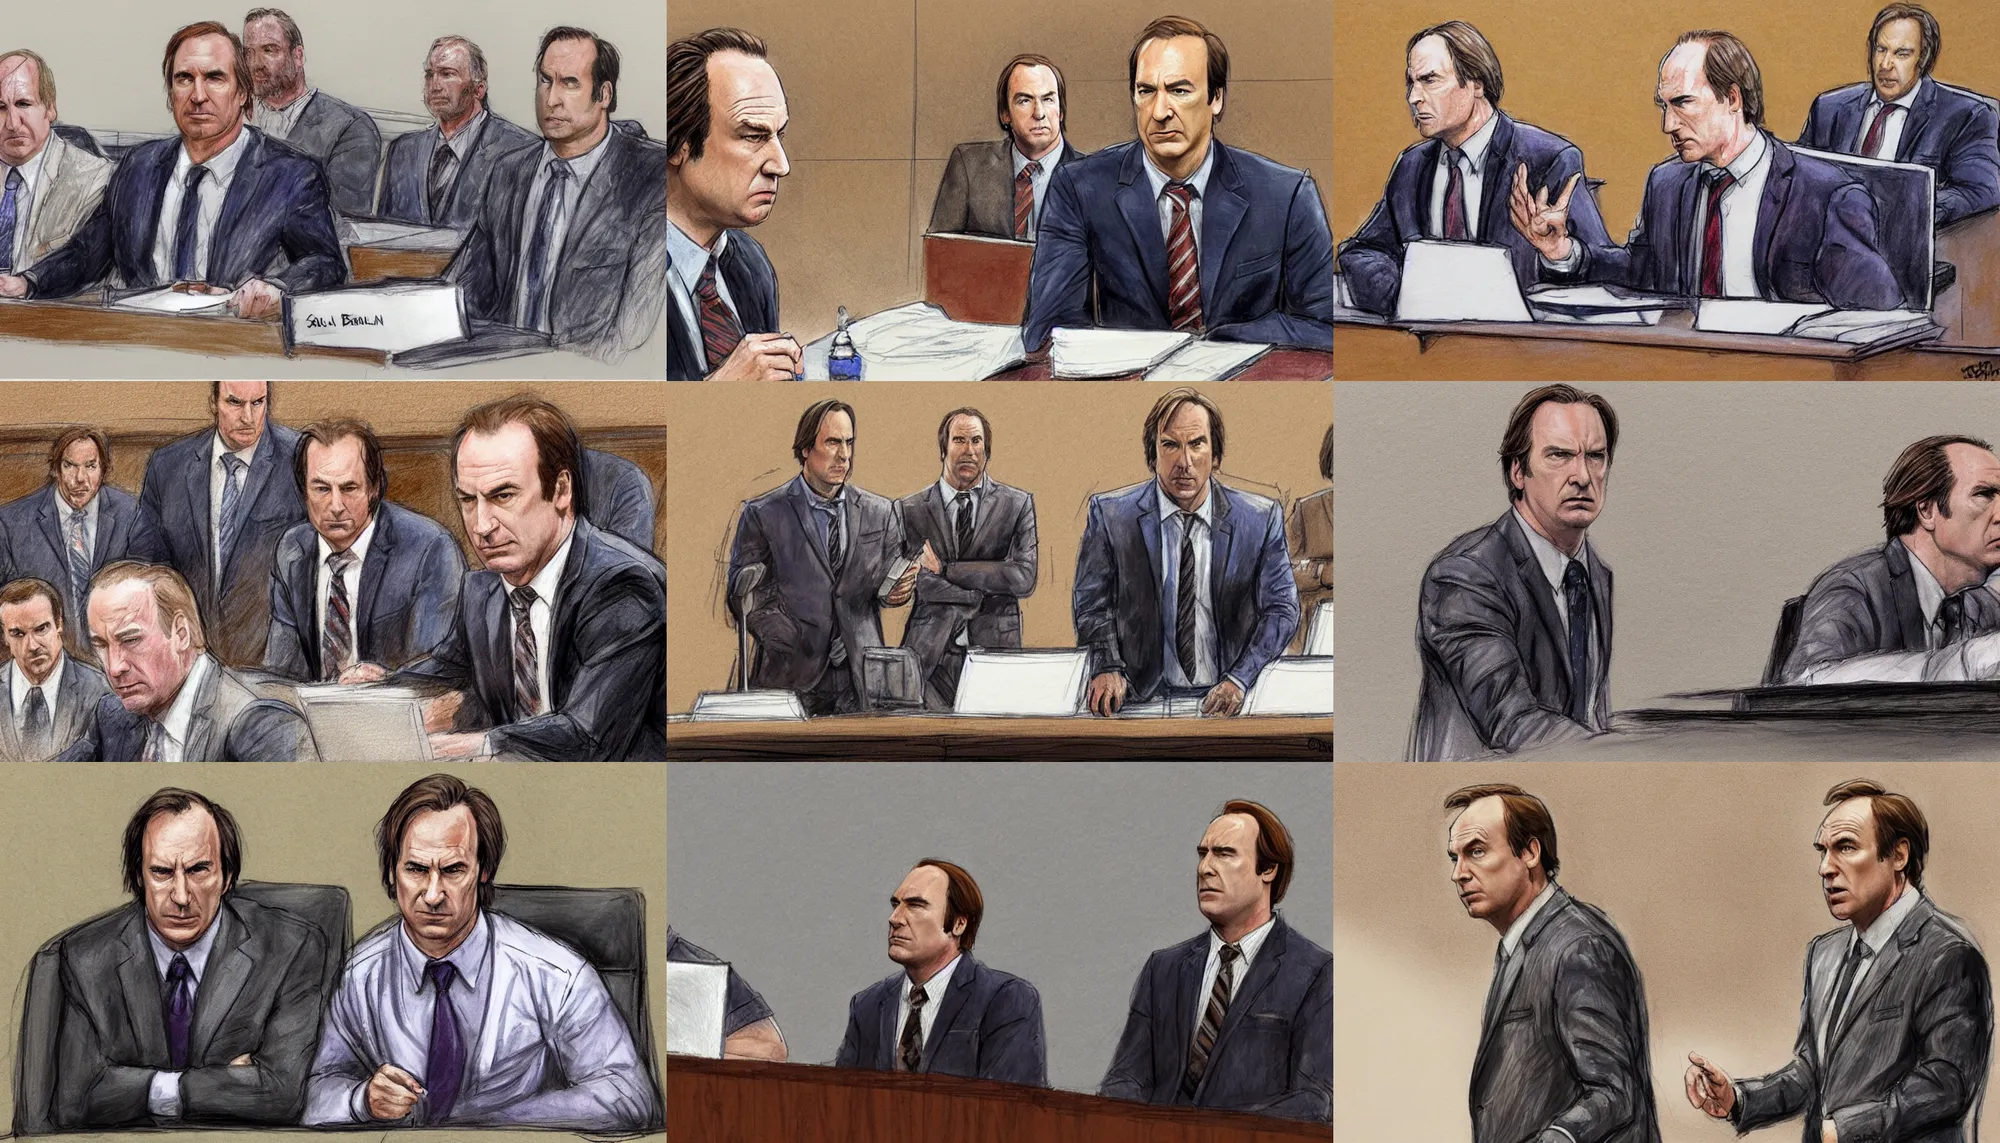 Prompt: Saul Goodman played by Bob Odenkirk defending Thanos played by Josh Brolin in court, courtroom sketch